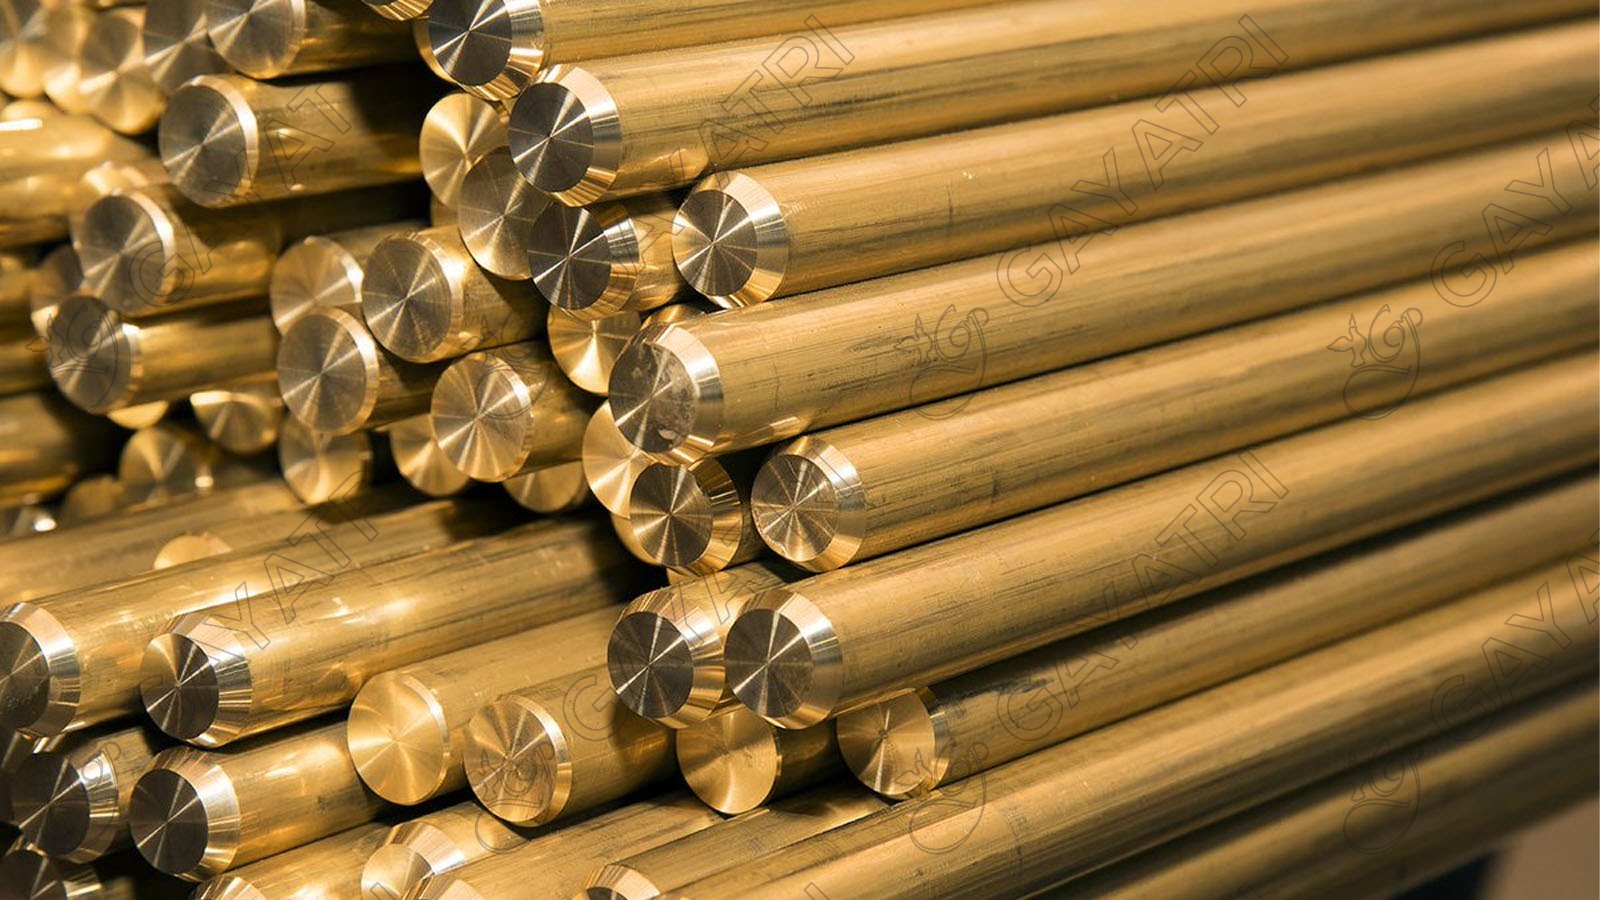 Brass & Copper Rods, Sections, Profiles & Tubes